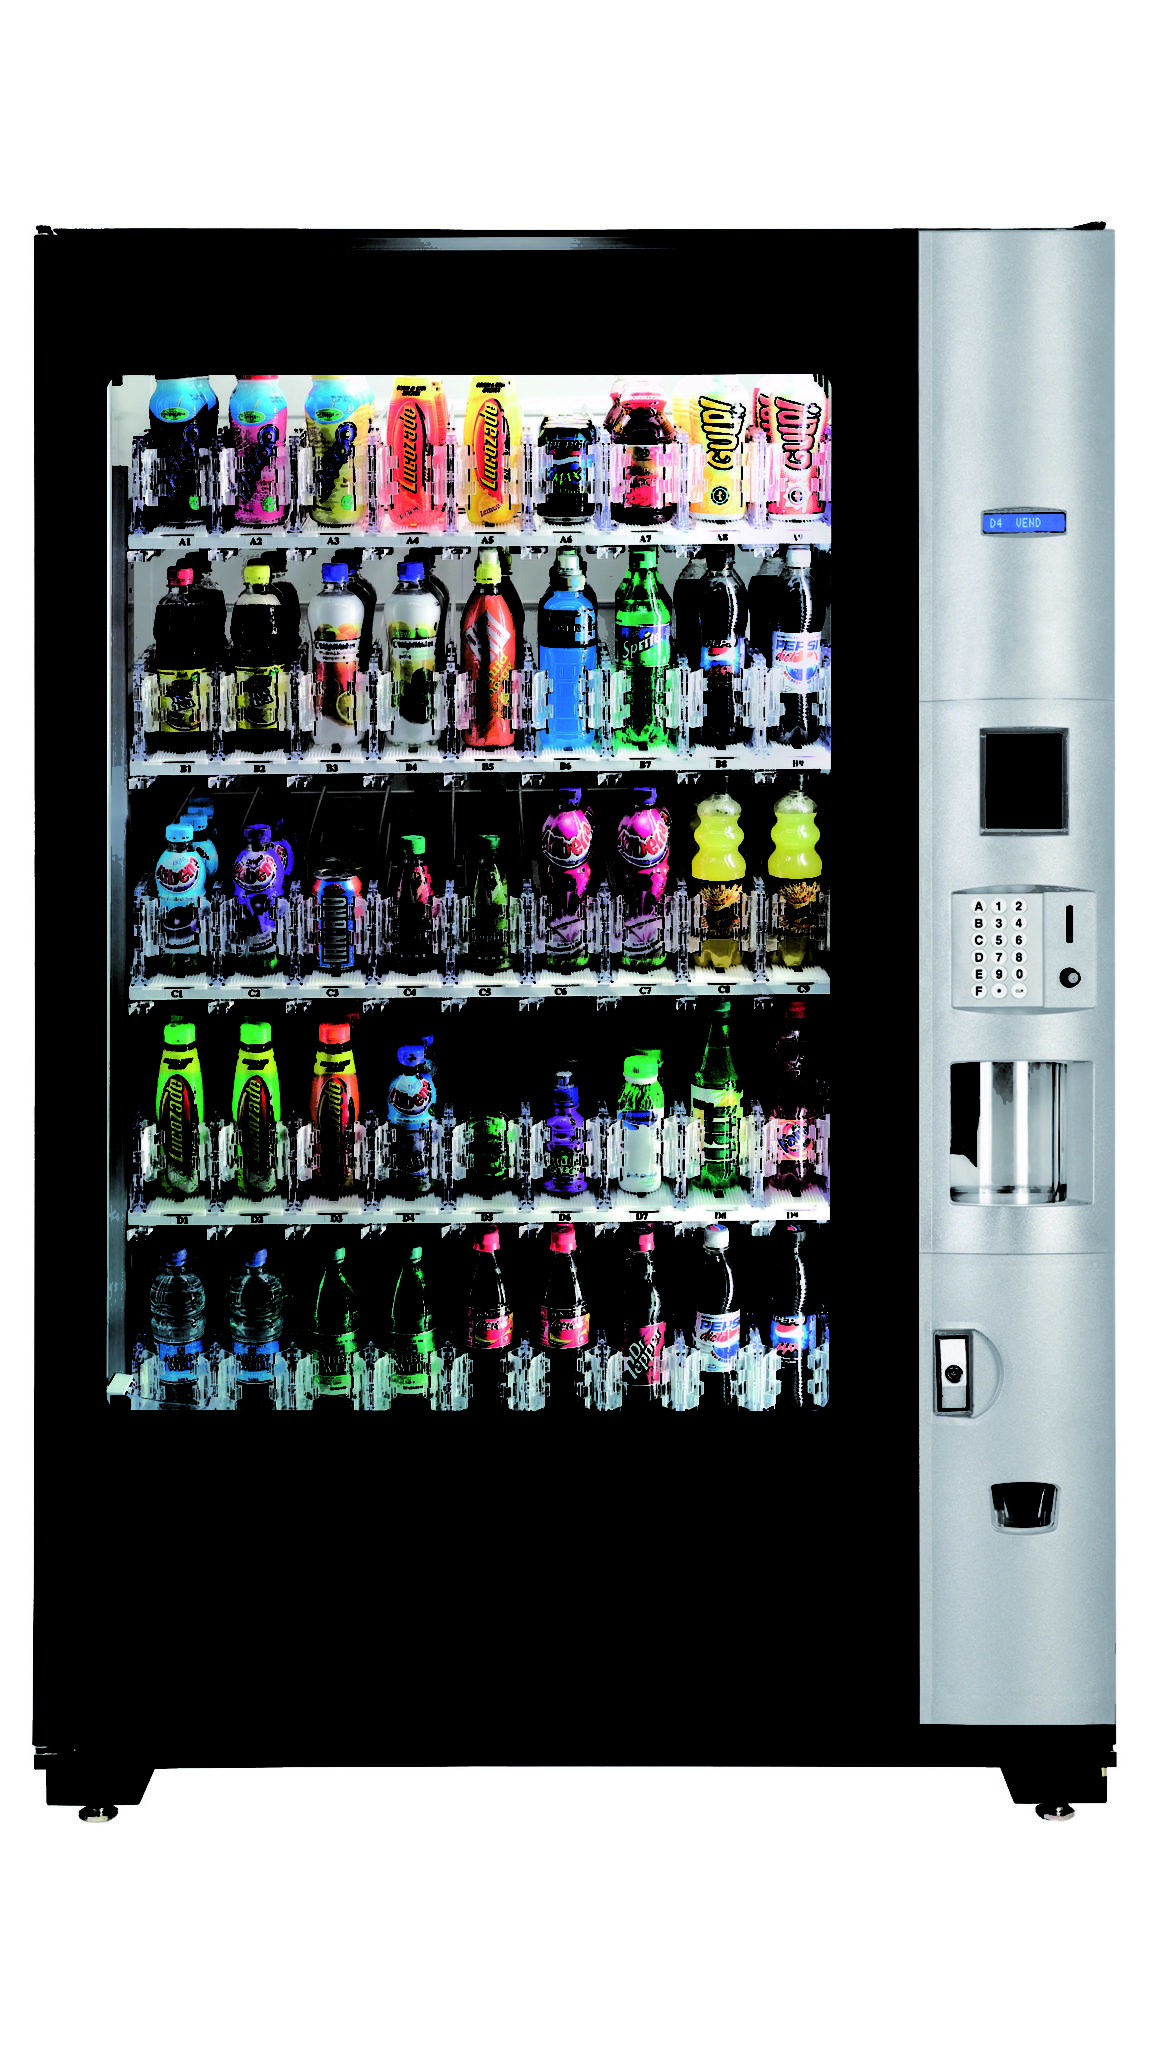 Details about   Bevmax 45 Cold Drinks Vending Machine 